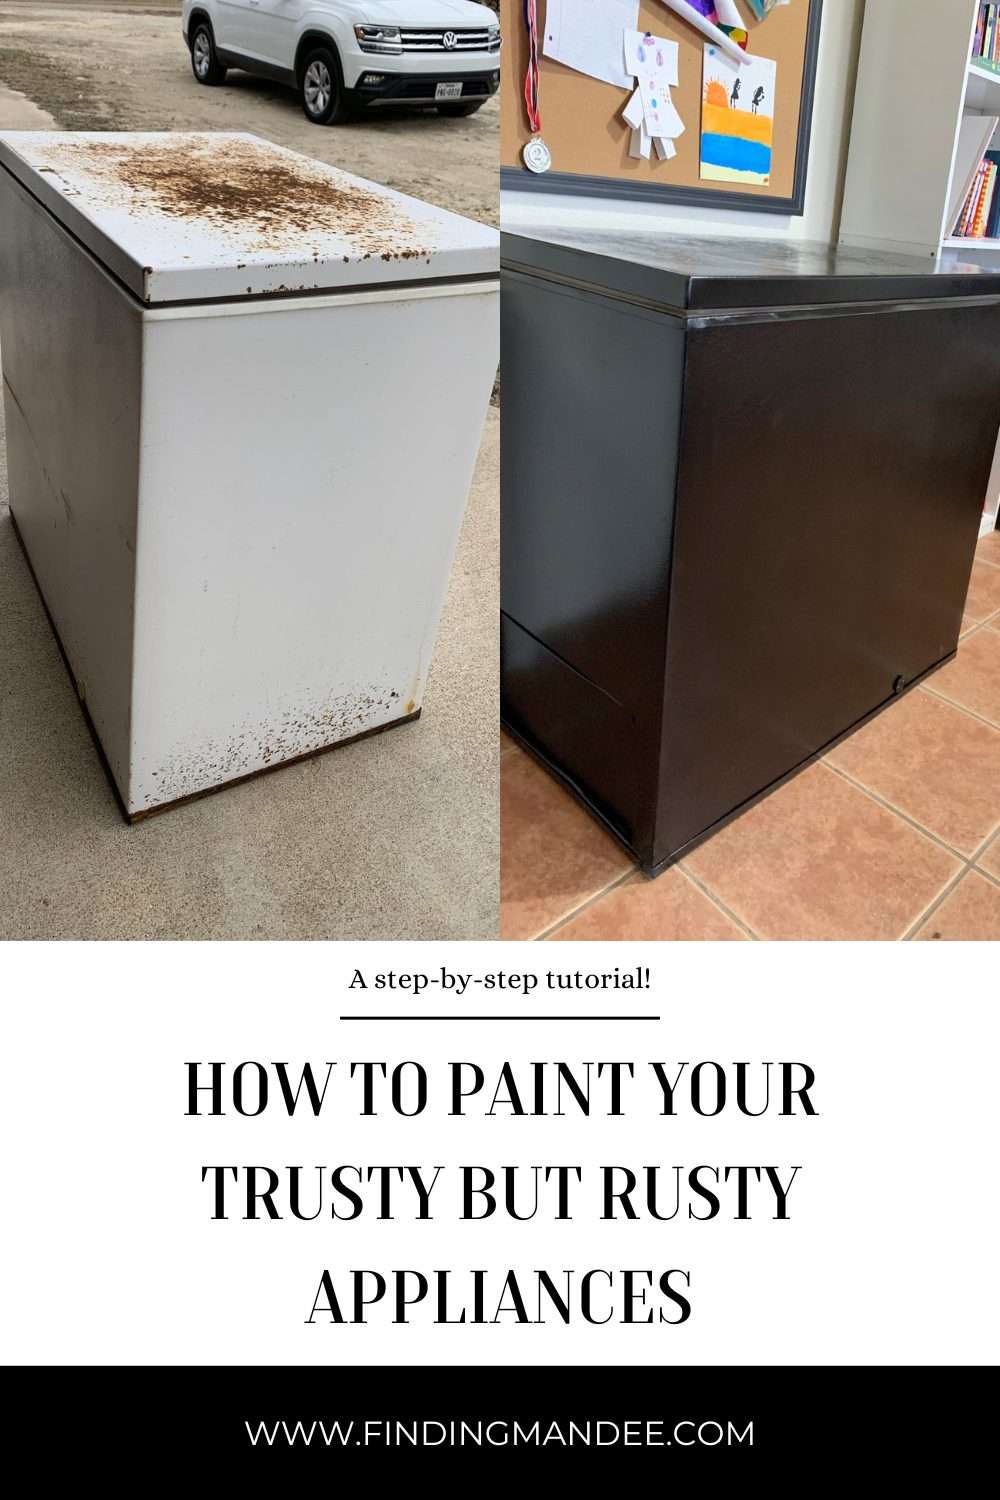 How to Paint Your Trusty but Rusty Appliances | Finding Mandee